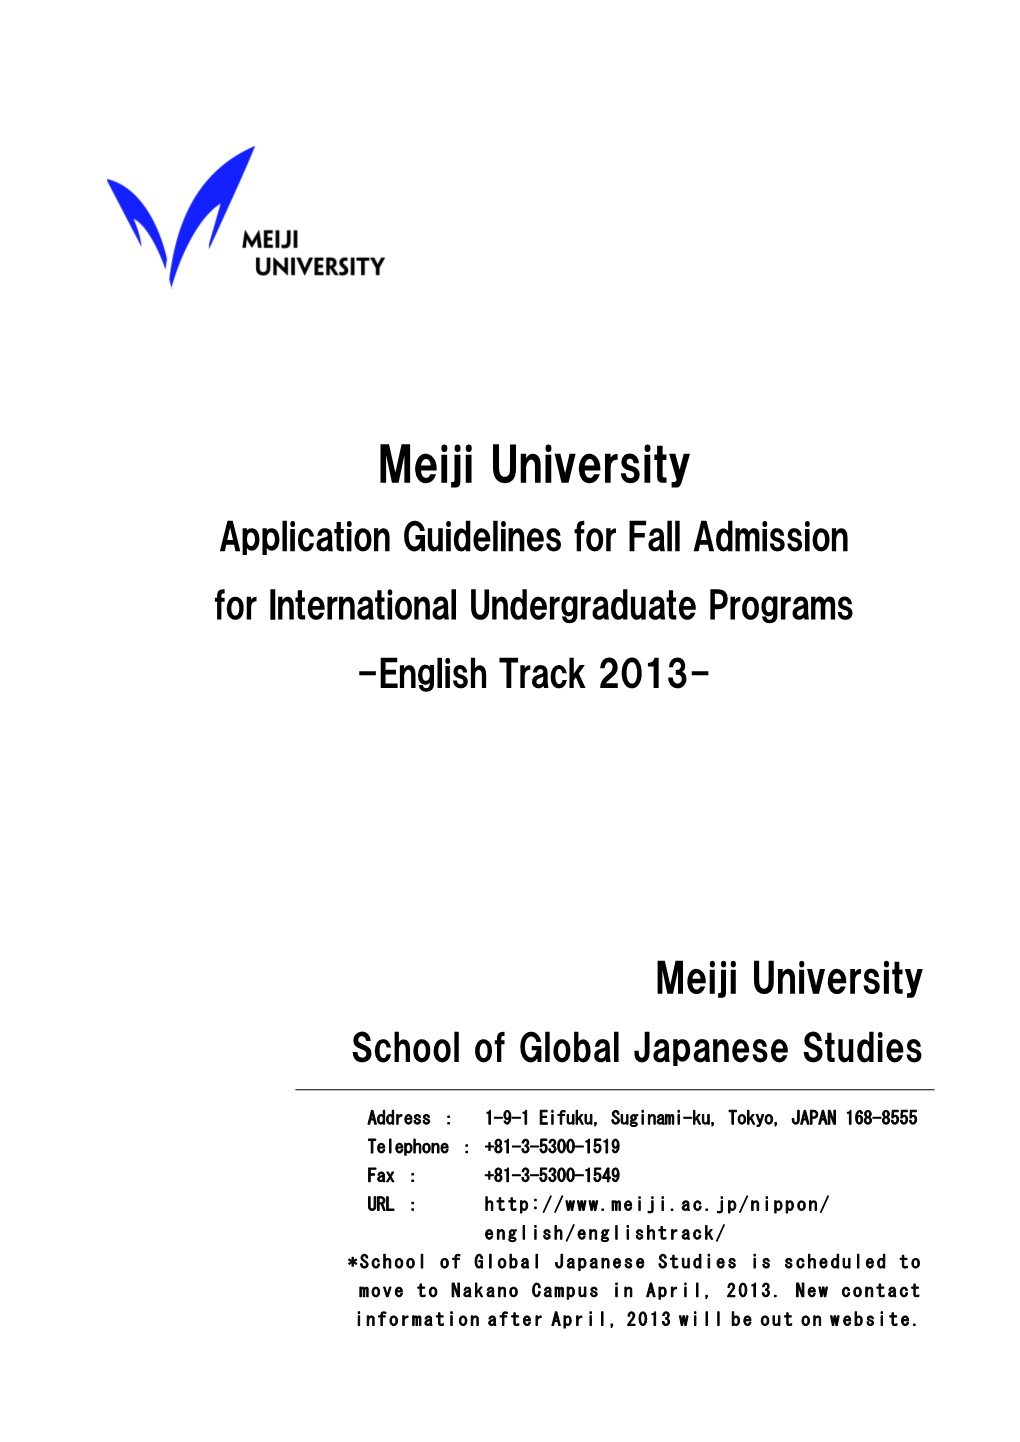 Meiji University Application Guidelines for Fall Admission for International Undergraduate Programs -English Track 2013